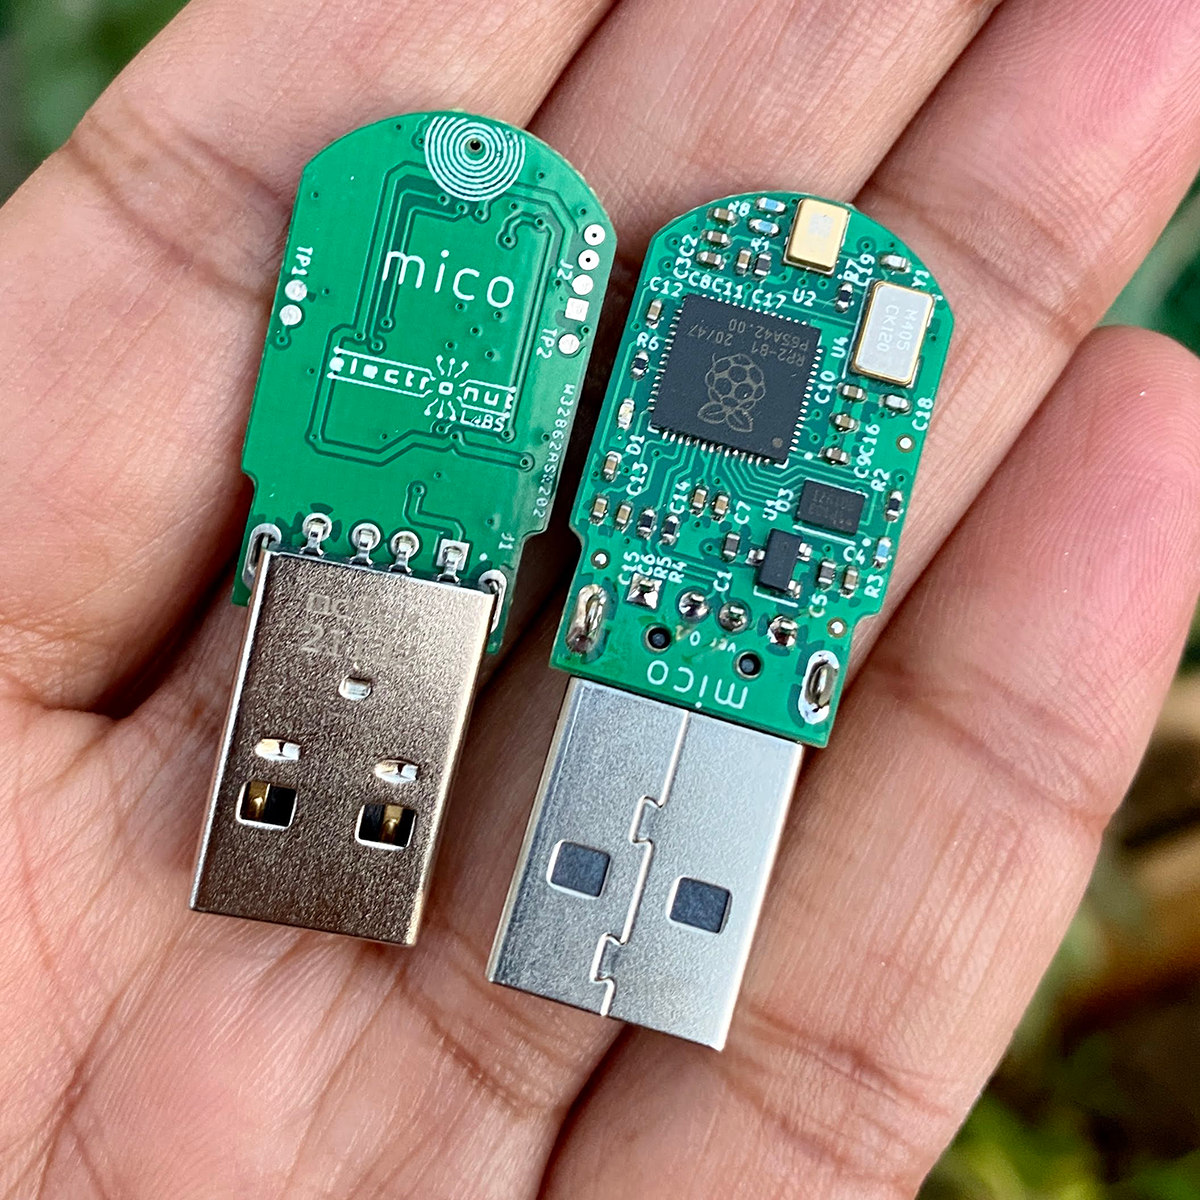 Open Source PDM to USB microphone based on the Raspberry PI RP2040